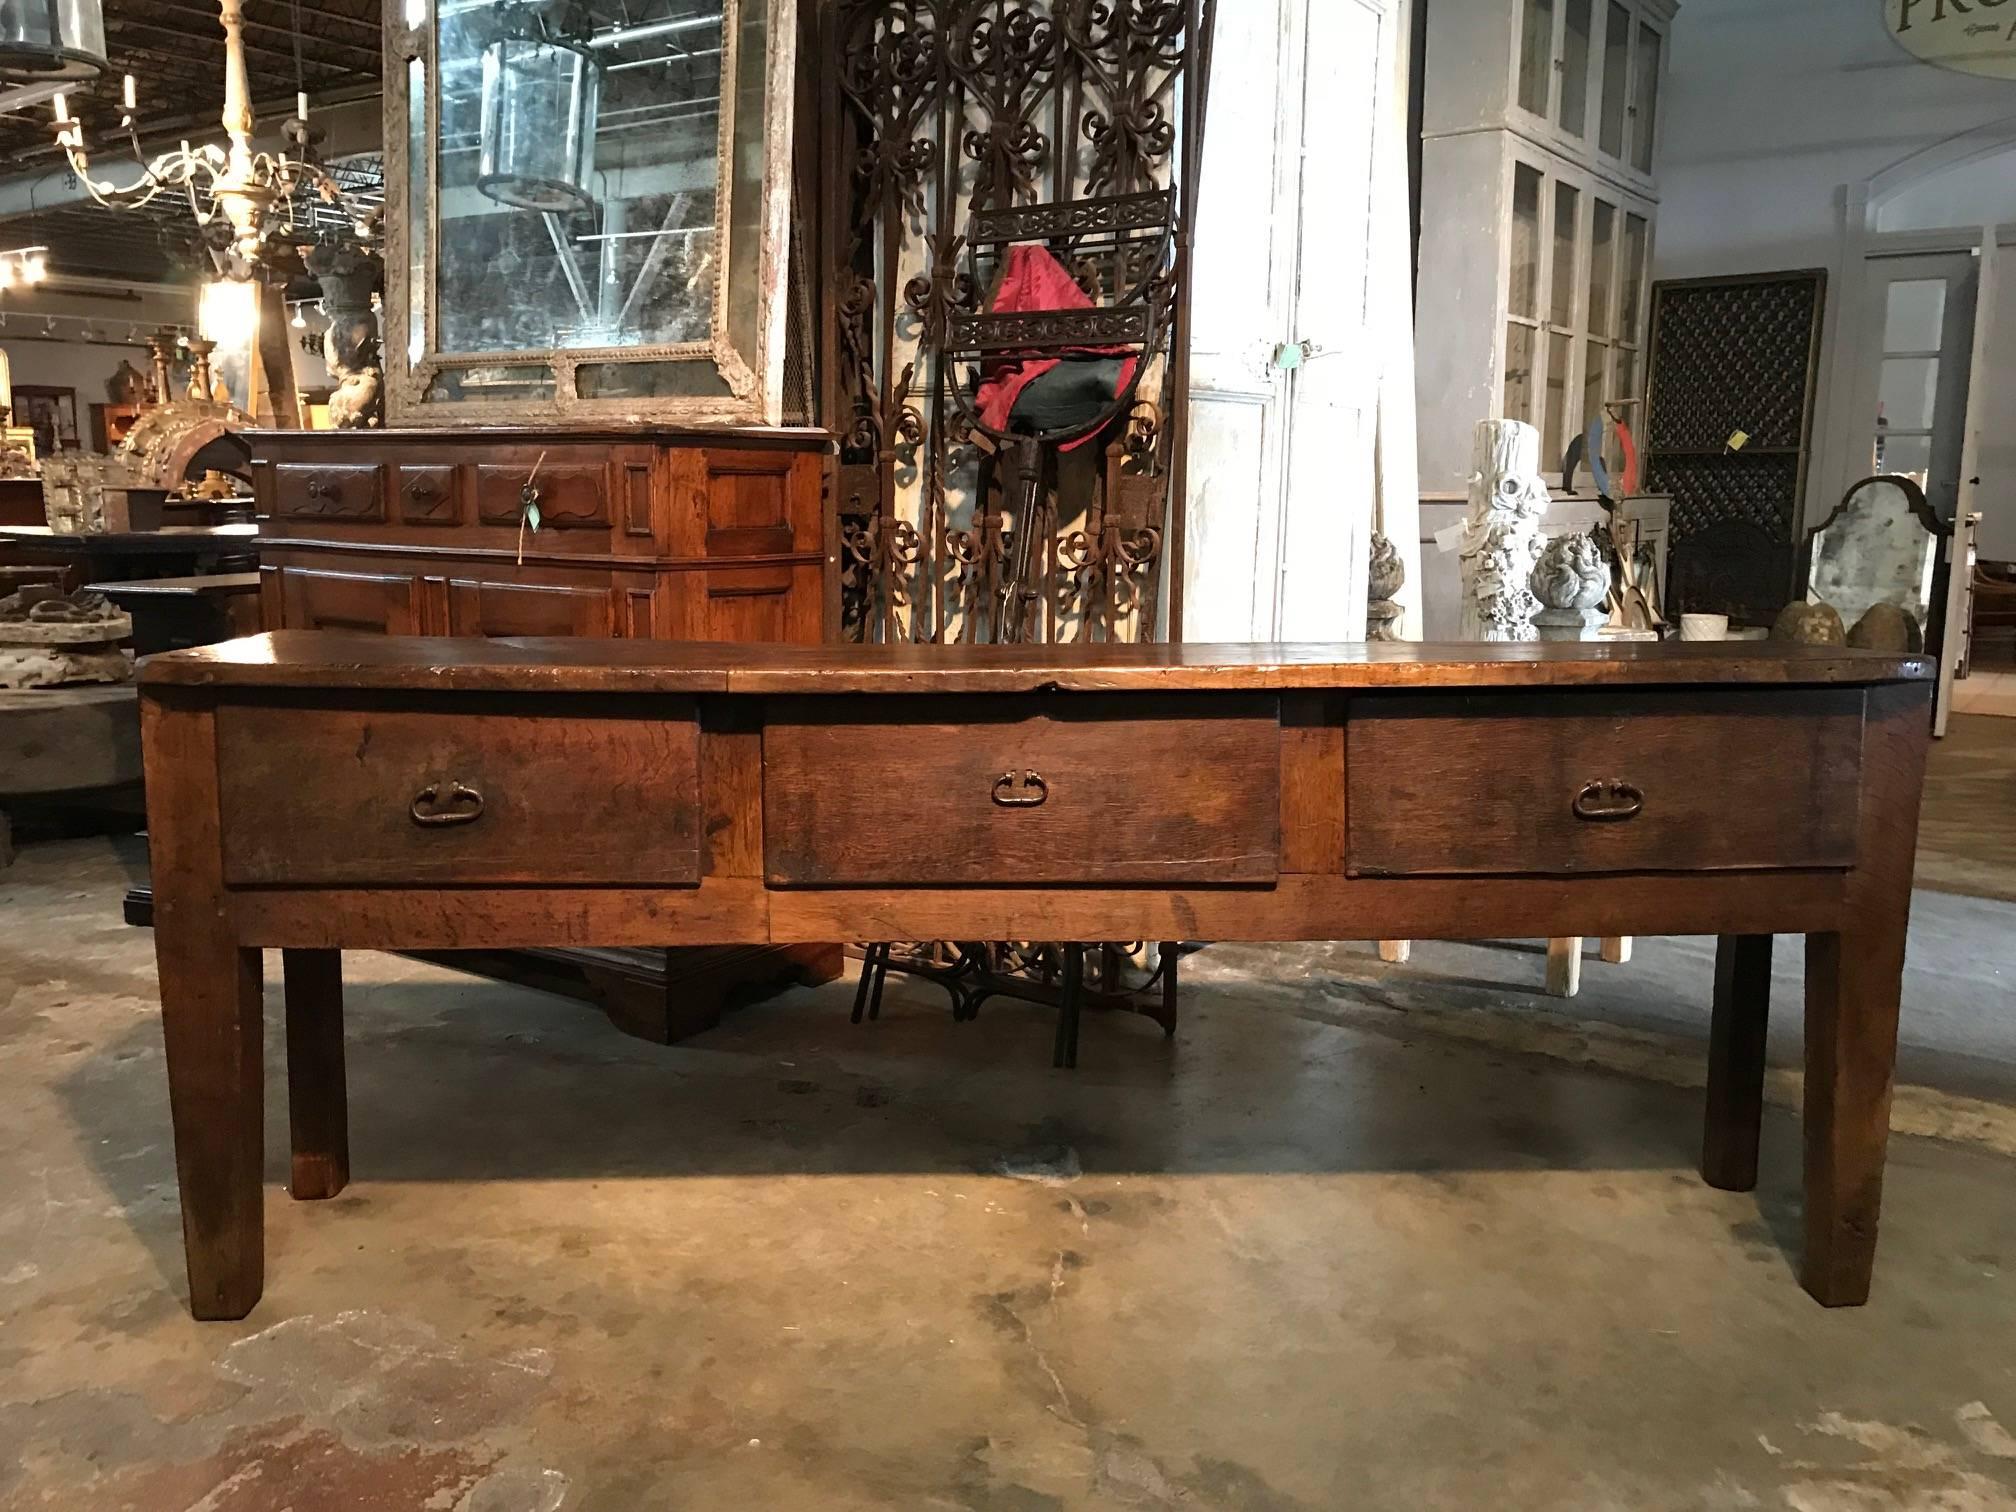 A very handsome and primitive 17th century console from the Catalan region of Spain. Very soundly constructed from pine and oak with three drawers and slightly tapered legs. Terrific patina. The nice narrow depth of this piece makes it ideal as a